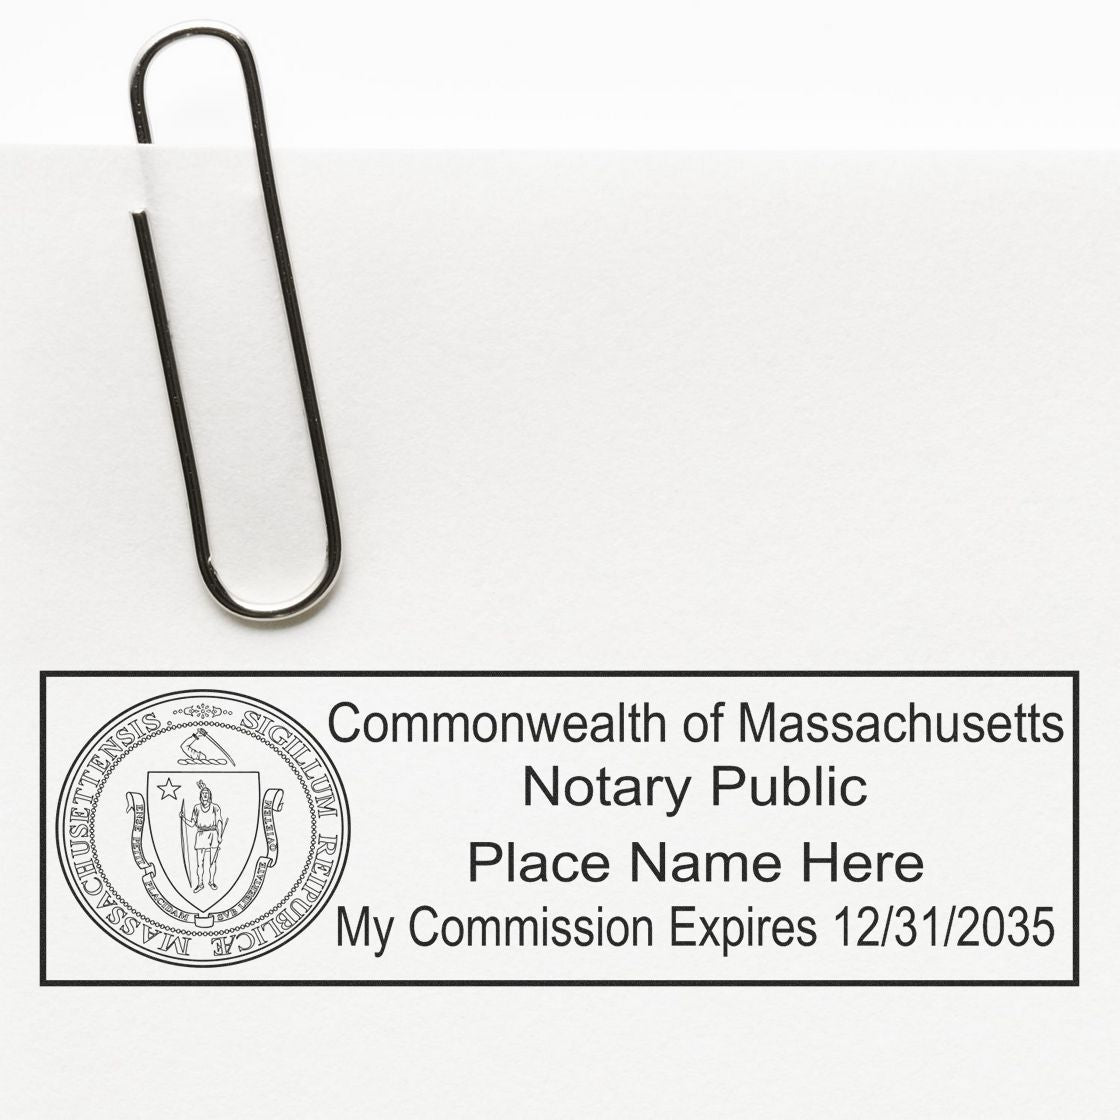 The Super Slim Massachusetts Notary Public Stamp stamp impression comes to life with a crisp, detailed photo on paper - showcasing true professional quality.